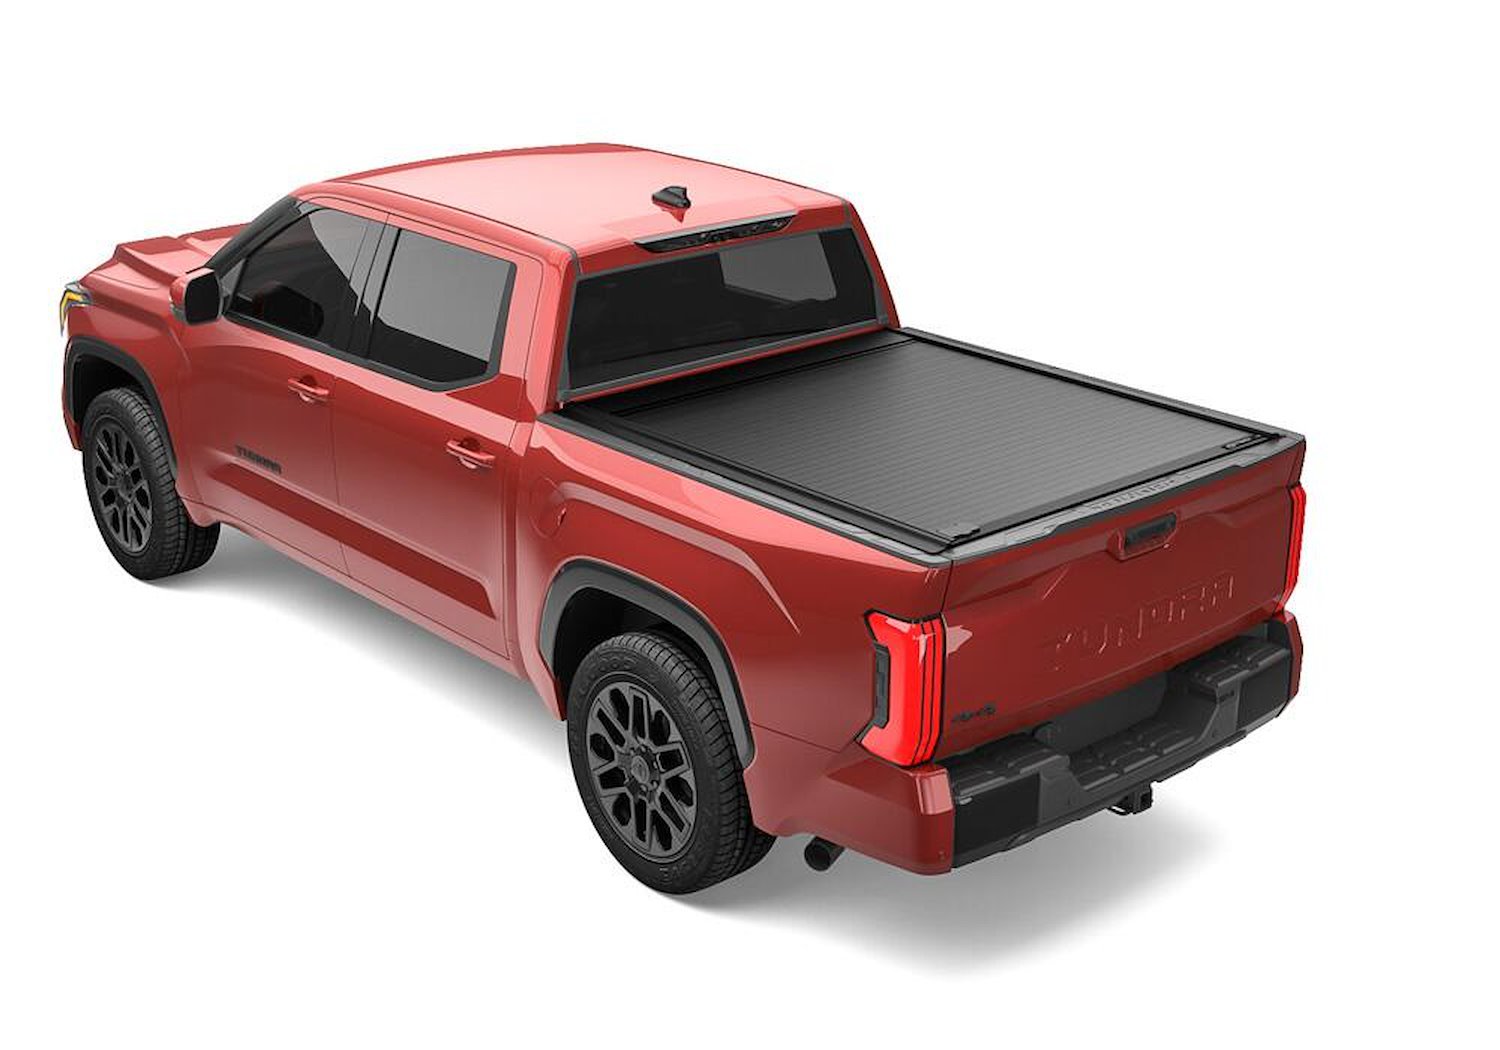 70861 PowertraxONE MX Retractable Tonneau Cover Fits Select Toyota Tundra CrewMax 5' 7" Bed with Deck Rail System